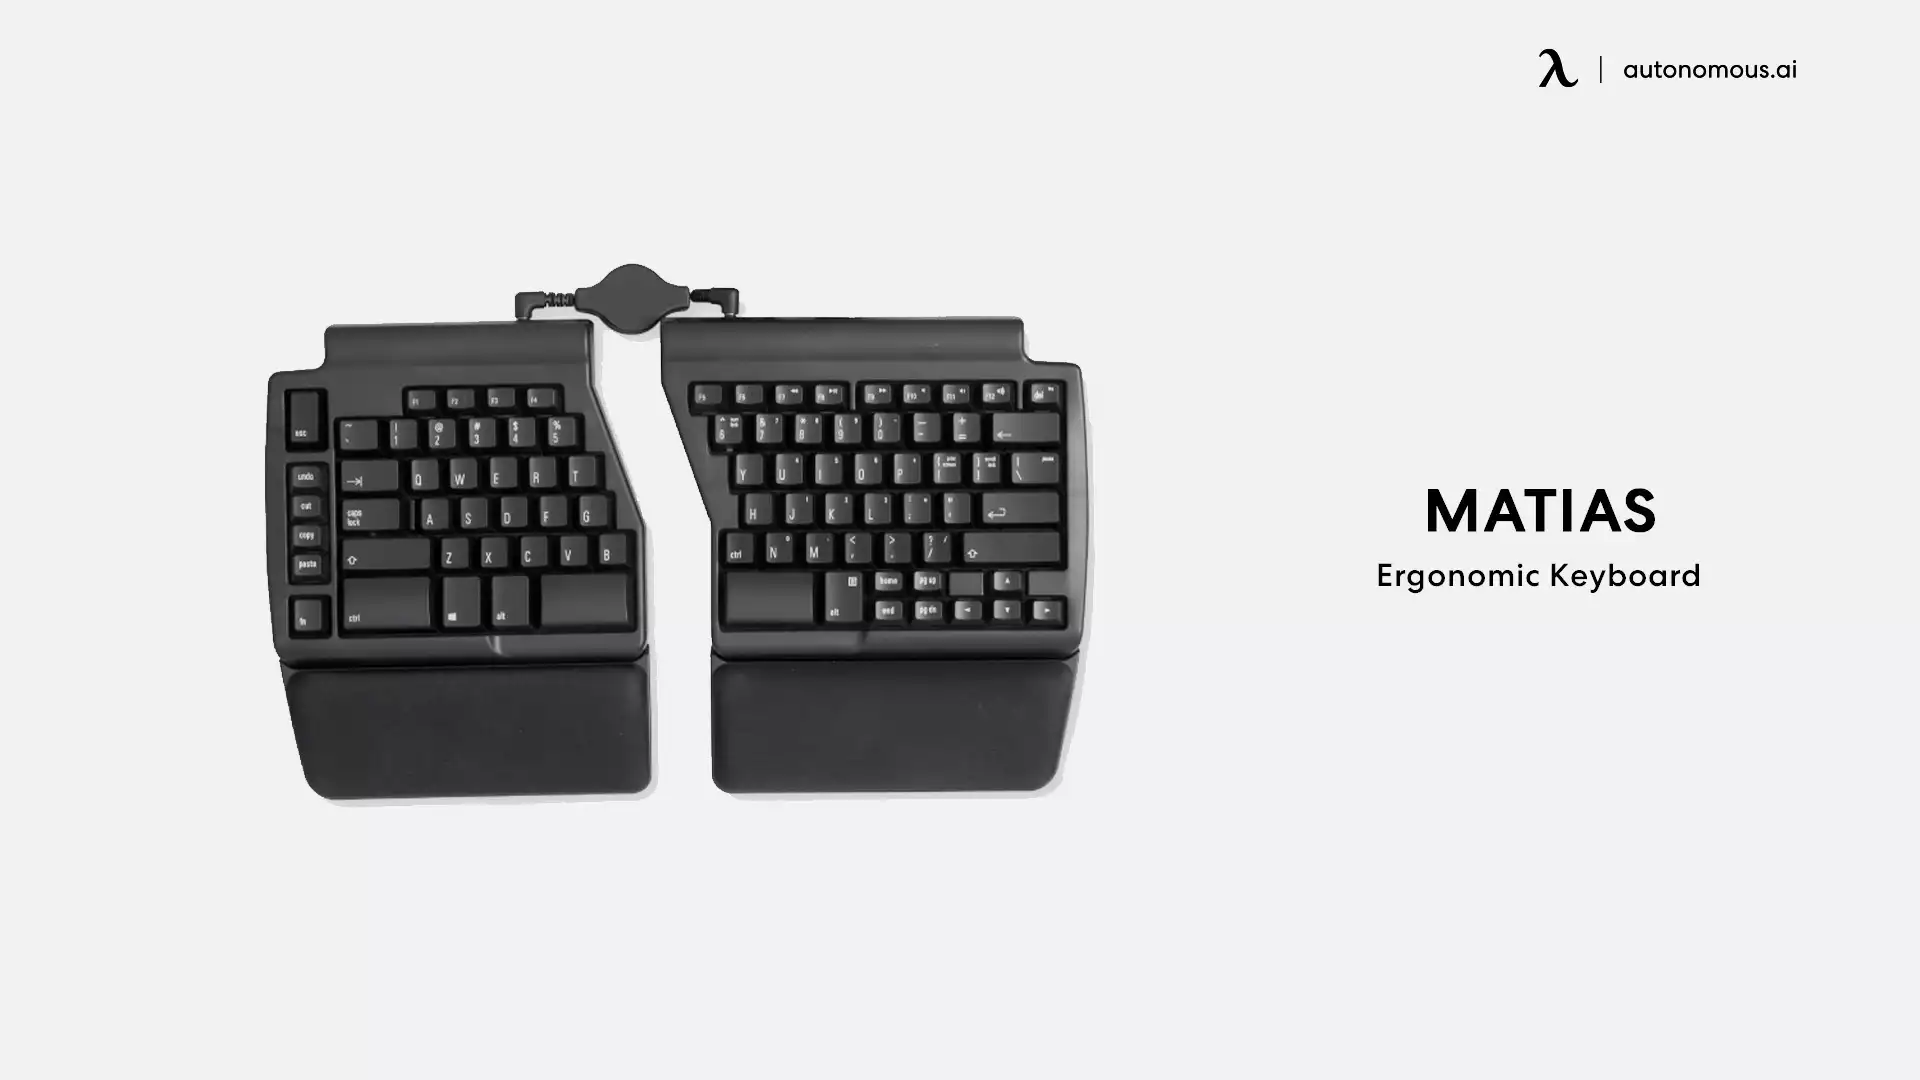 Ergonomic Keyboard for PC by Matias desk accessories for men